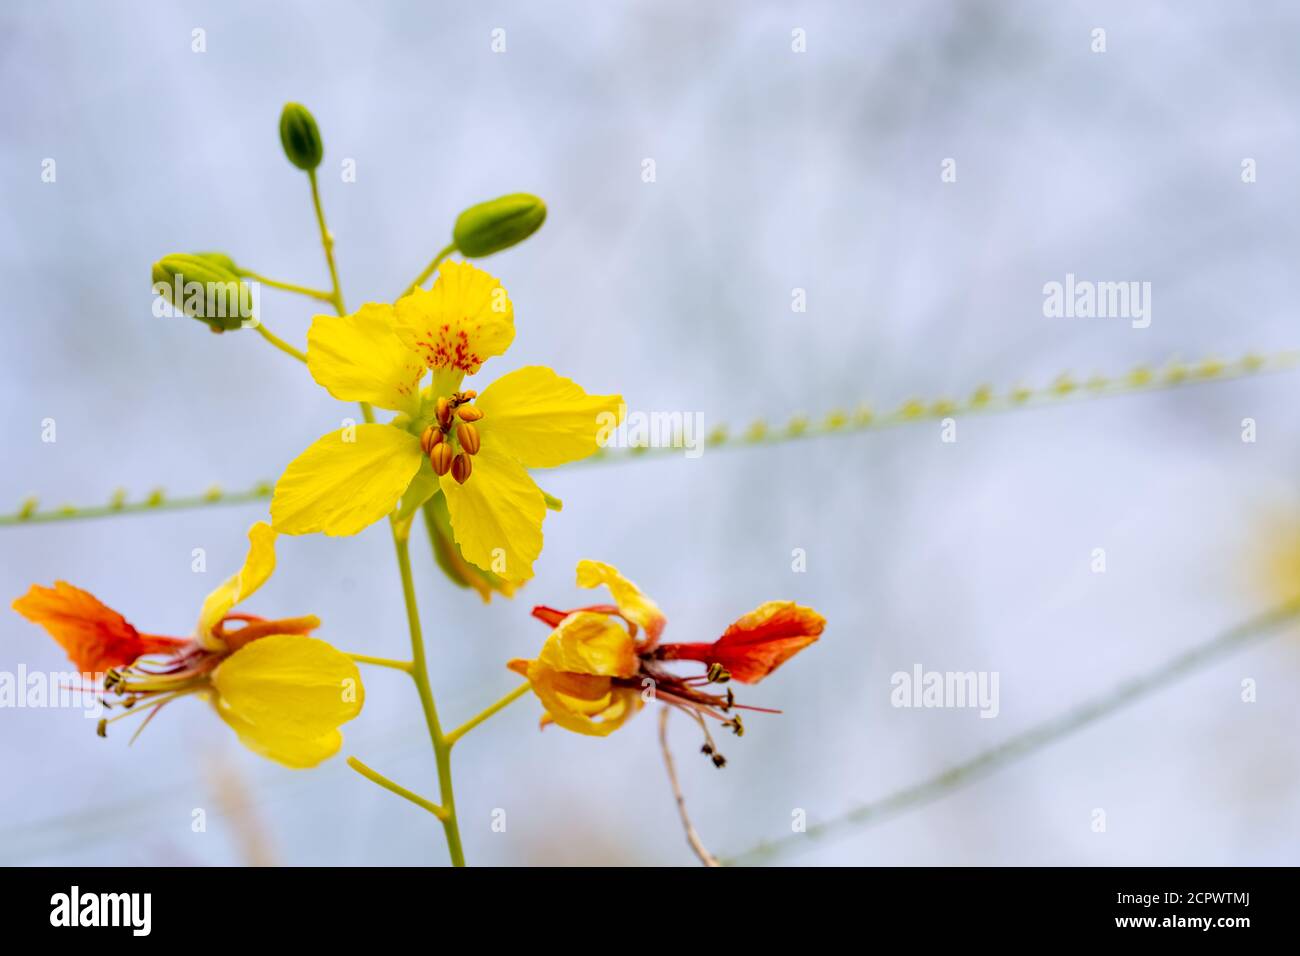 Yellow flowers of a Jerusalem thorn tree or Palo Verde (Parkinsonia aculeata) in a park in Granada Stock Photo